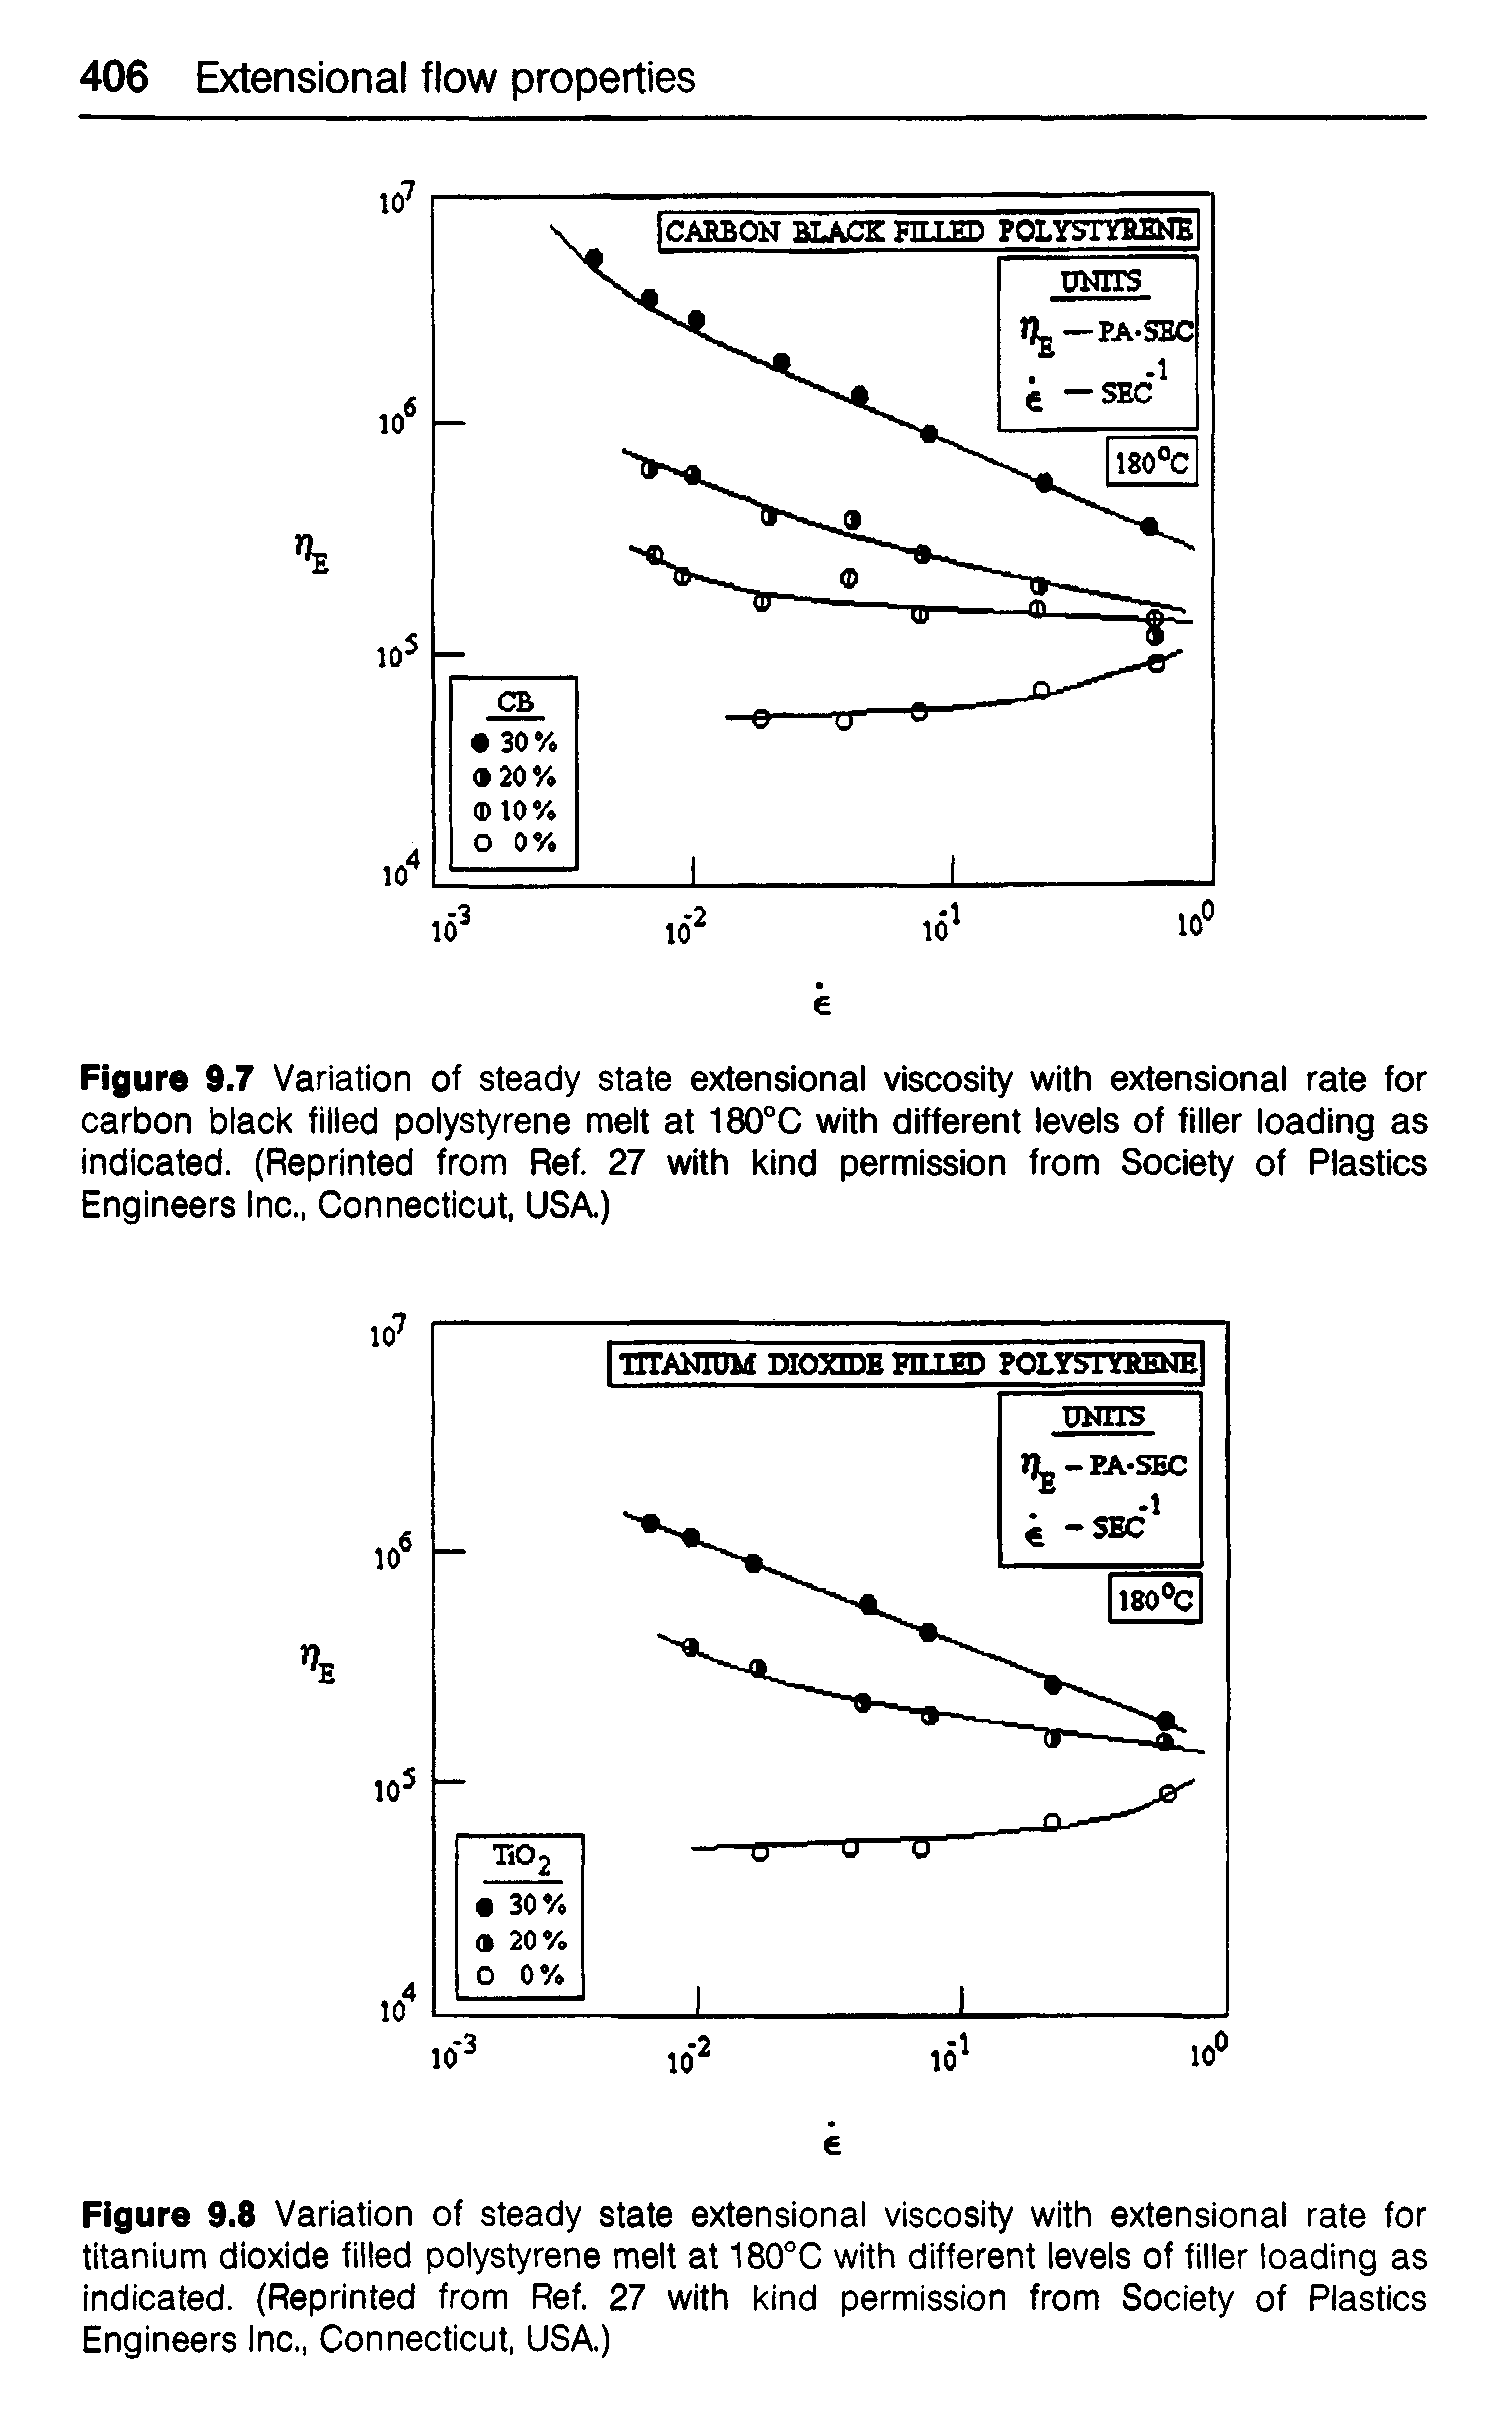 Figure 9.8 Variation of steady state extensional viscosity with extensional rate for titanium dioxide filled polystyrene melt at 180°C with different levels of filler loading as indicated. (Reprinted from Ref. 27 with kind permission from Society of Plastics Engineers Inc., Connecticut, USA.)...